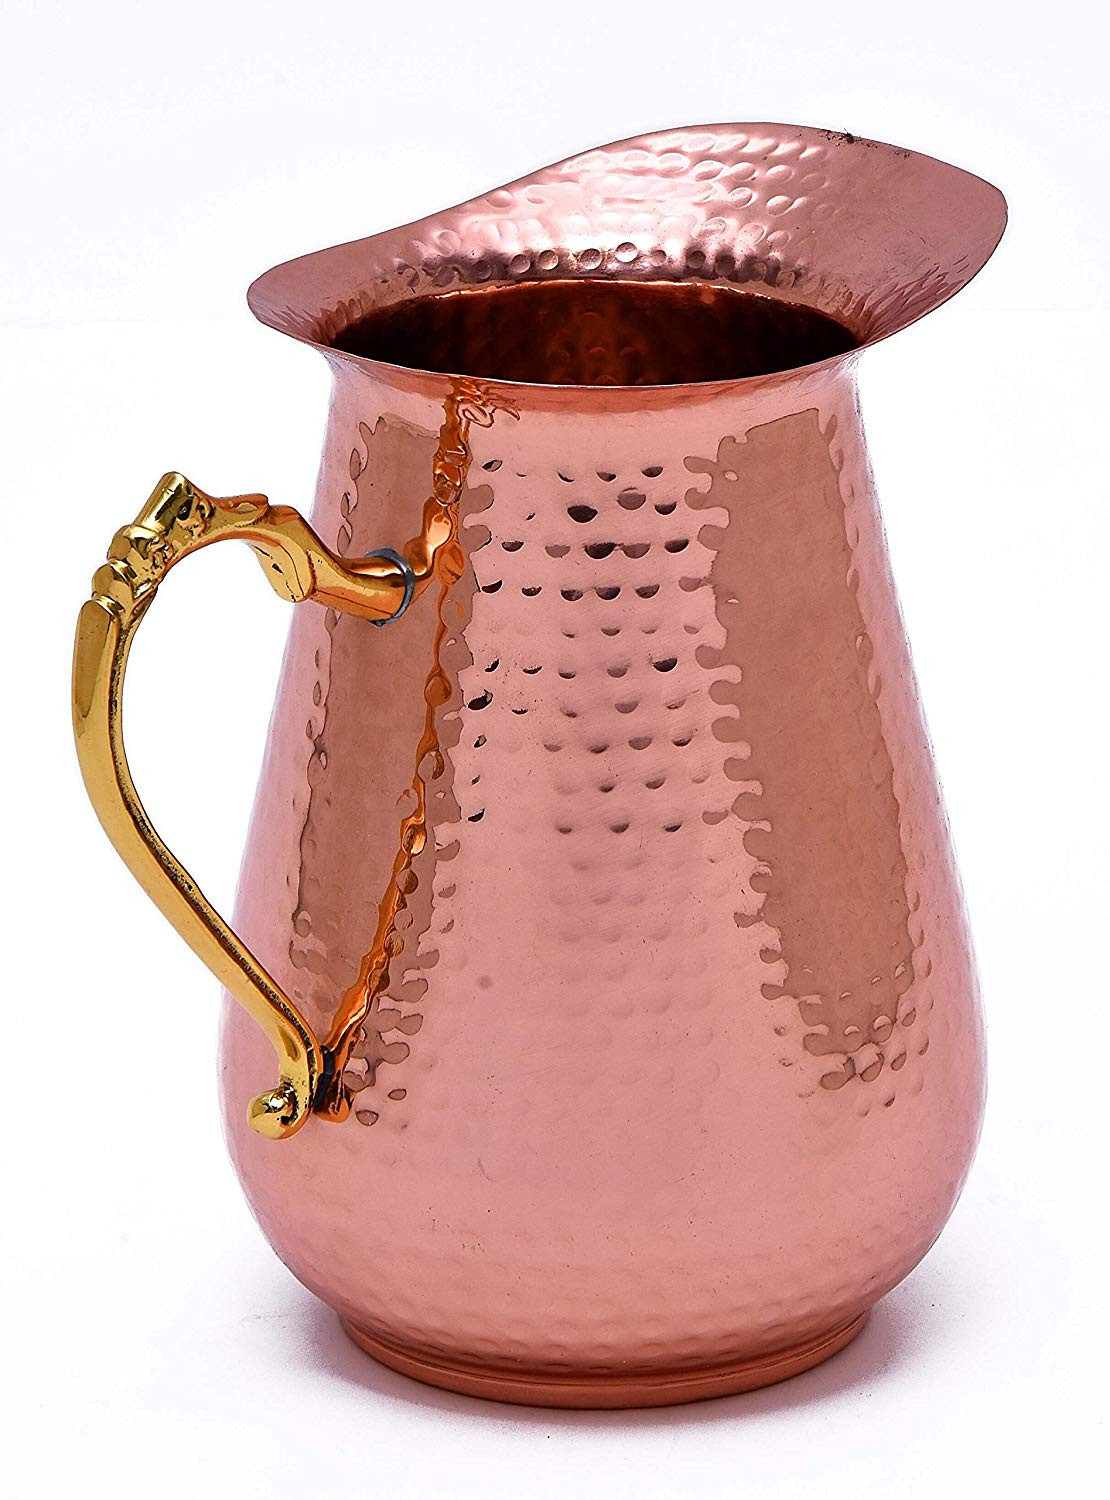 14 Ideal Antique Hammered Copper Vase 2024 free download antique hammered copper vase of amazon com solid copper pitcher for water premium quality intended for amazon com solid copper pitcher for water premium quality hammered design jug ayurveda 